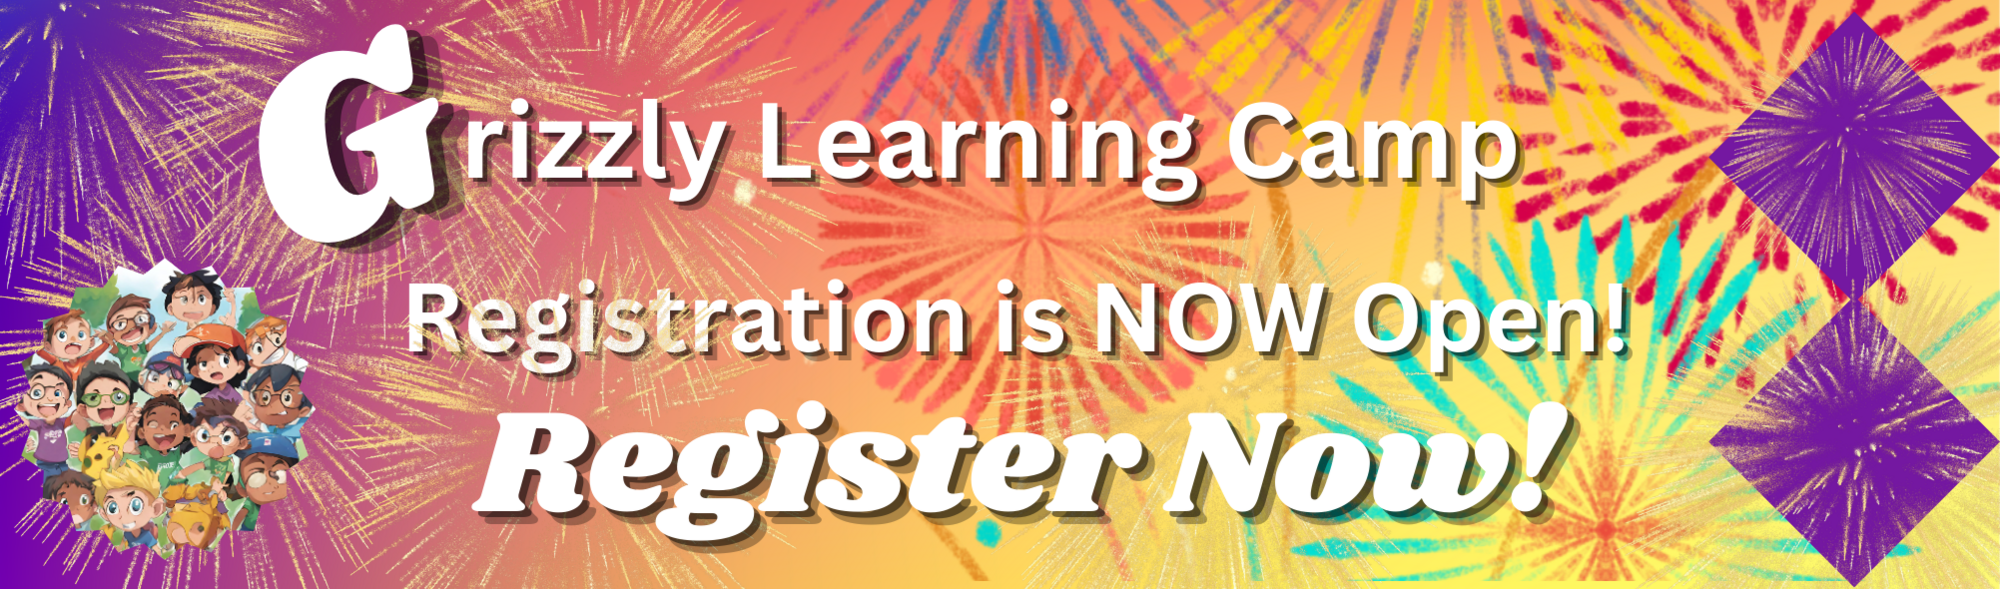 Grizzly Learning Camp is Coming! Registration will open soon.